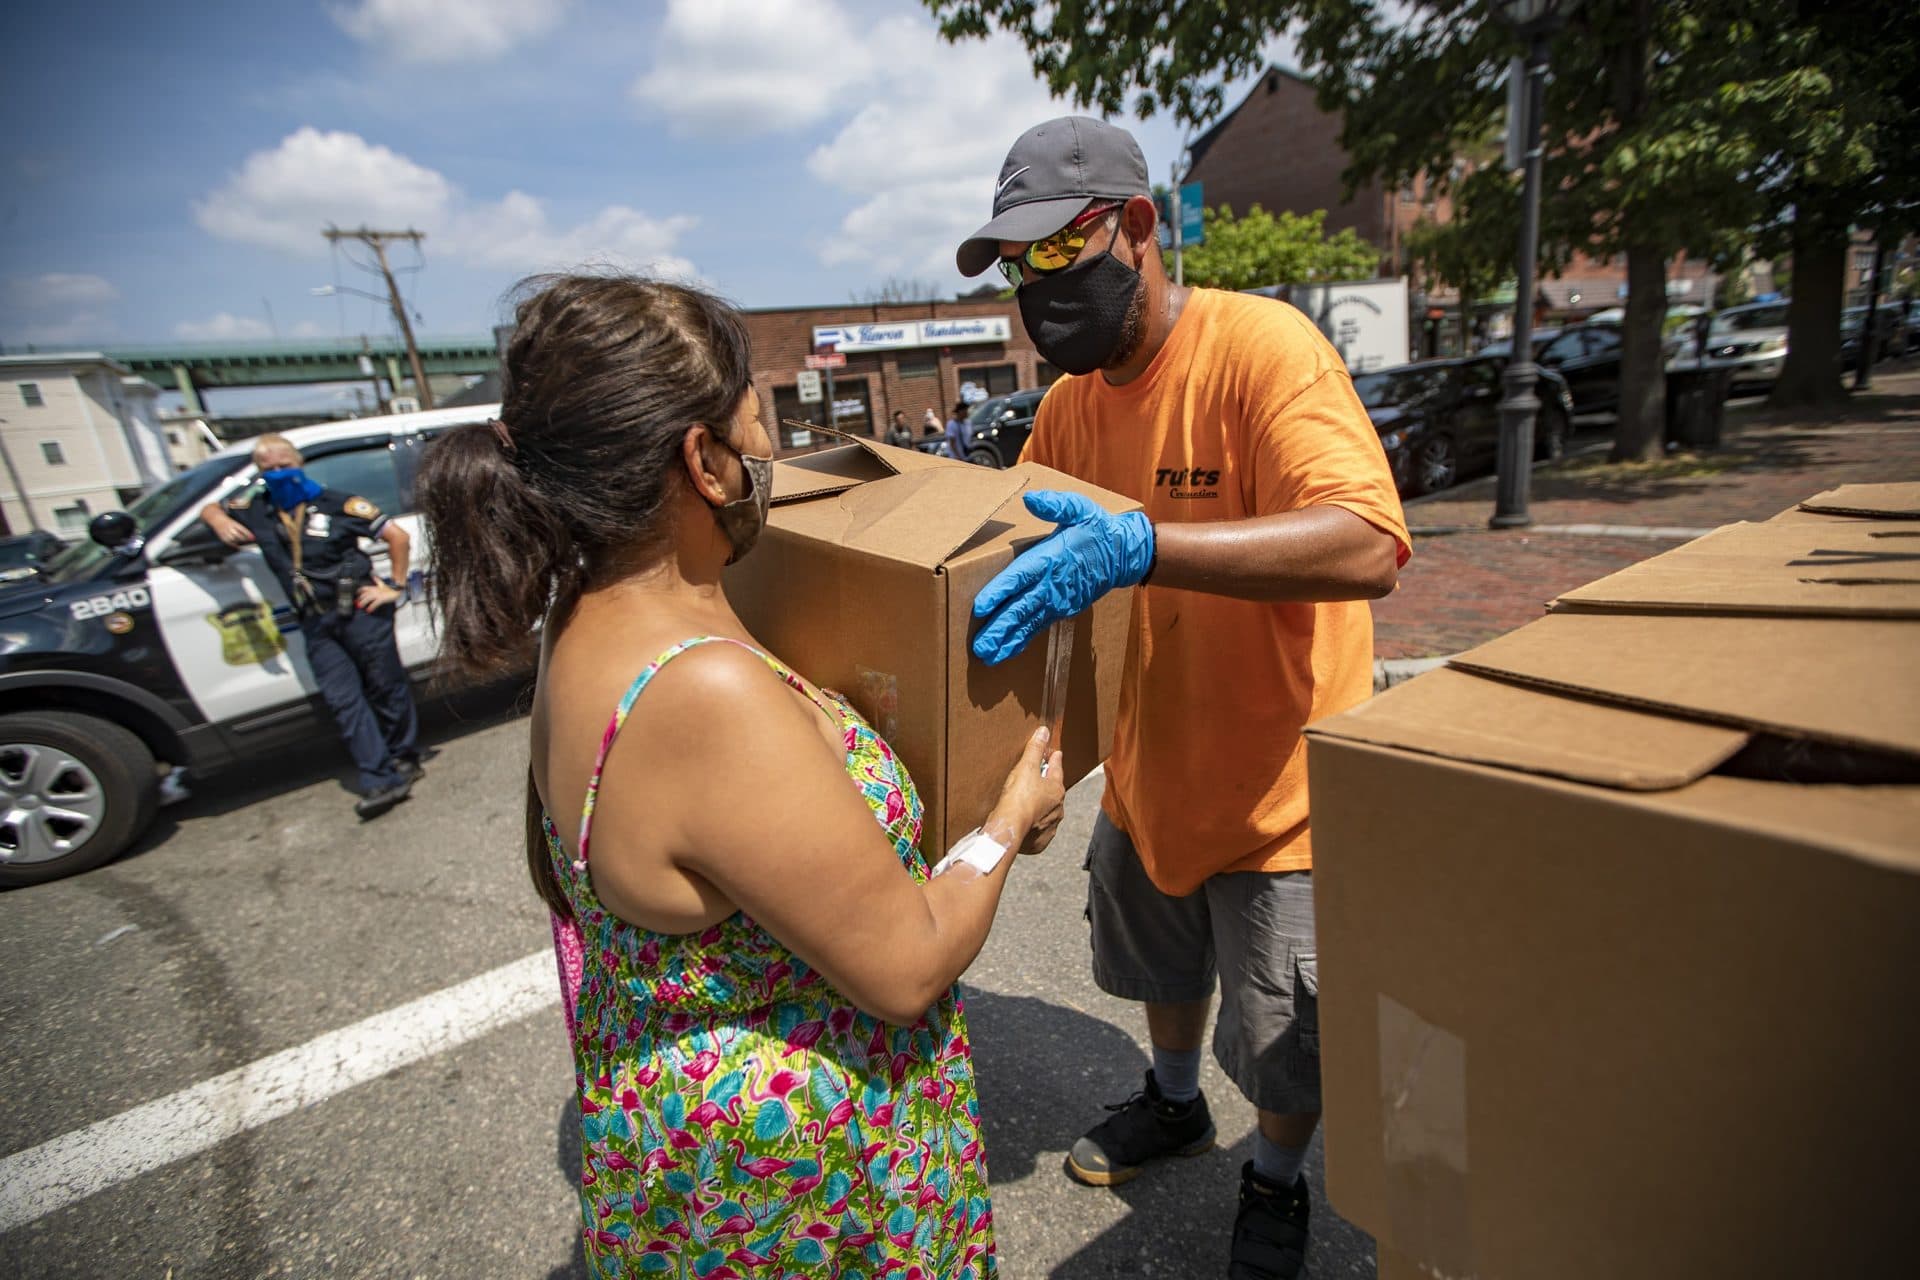 A Chelsea resident receives a box of food supplies at a food pantry in Chelsea Square. (Jesse Costa/WBUR)